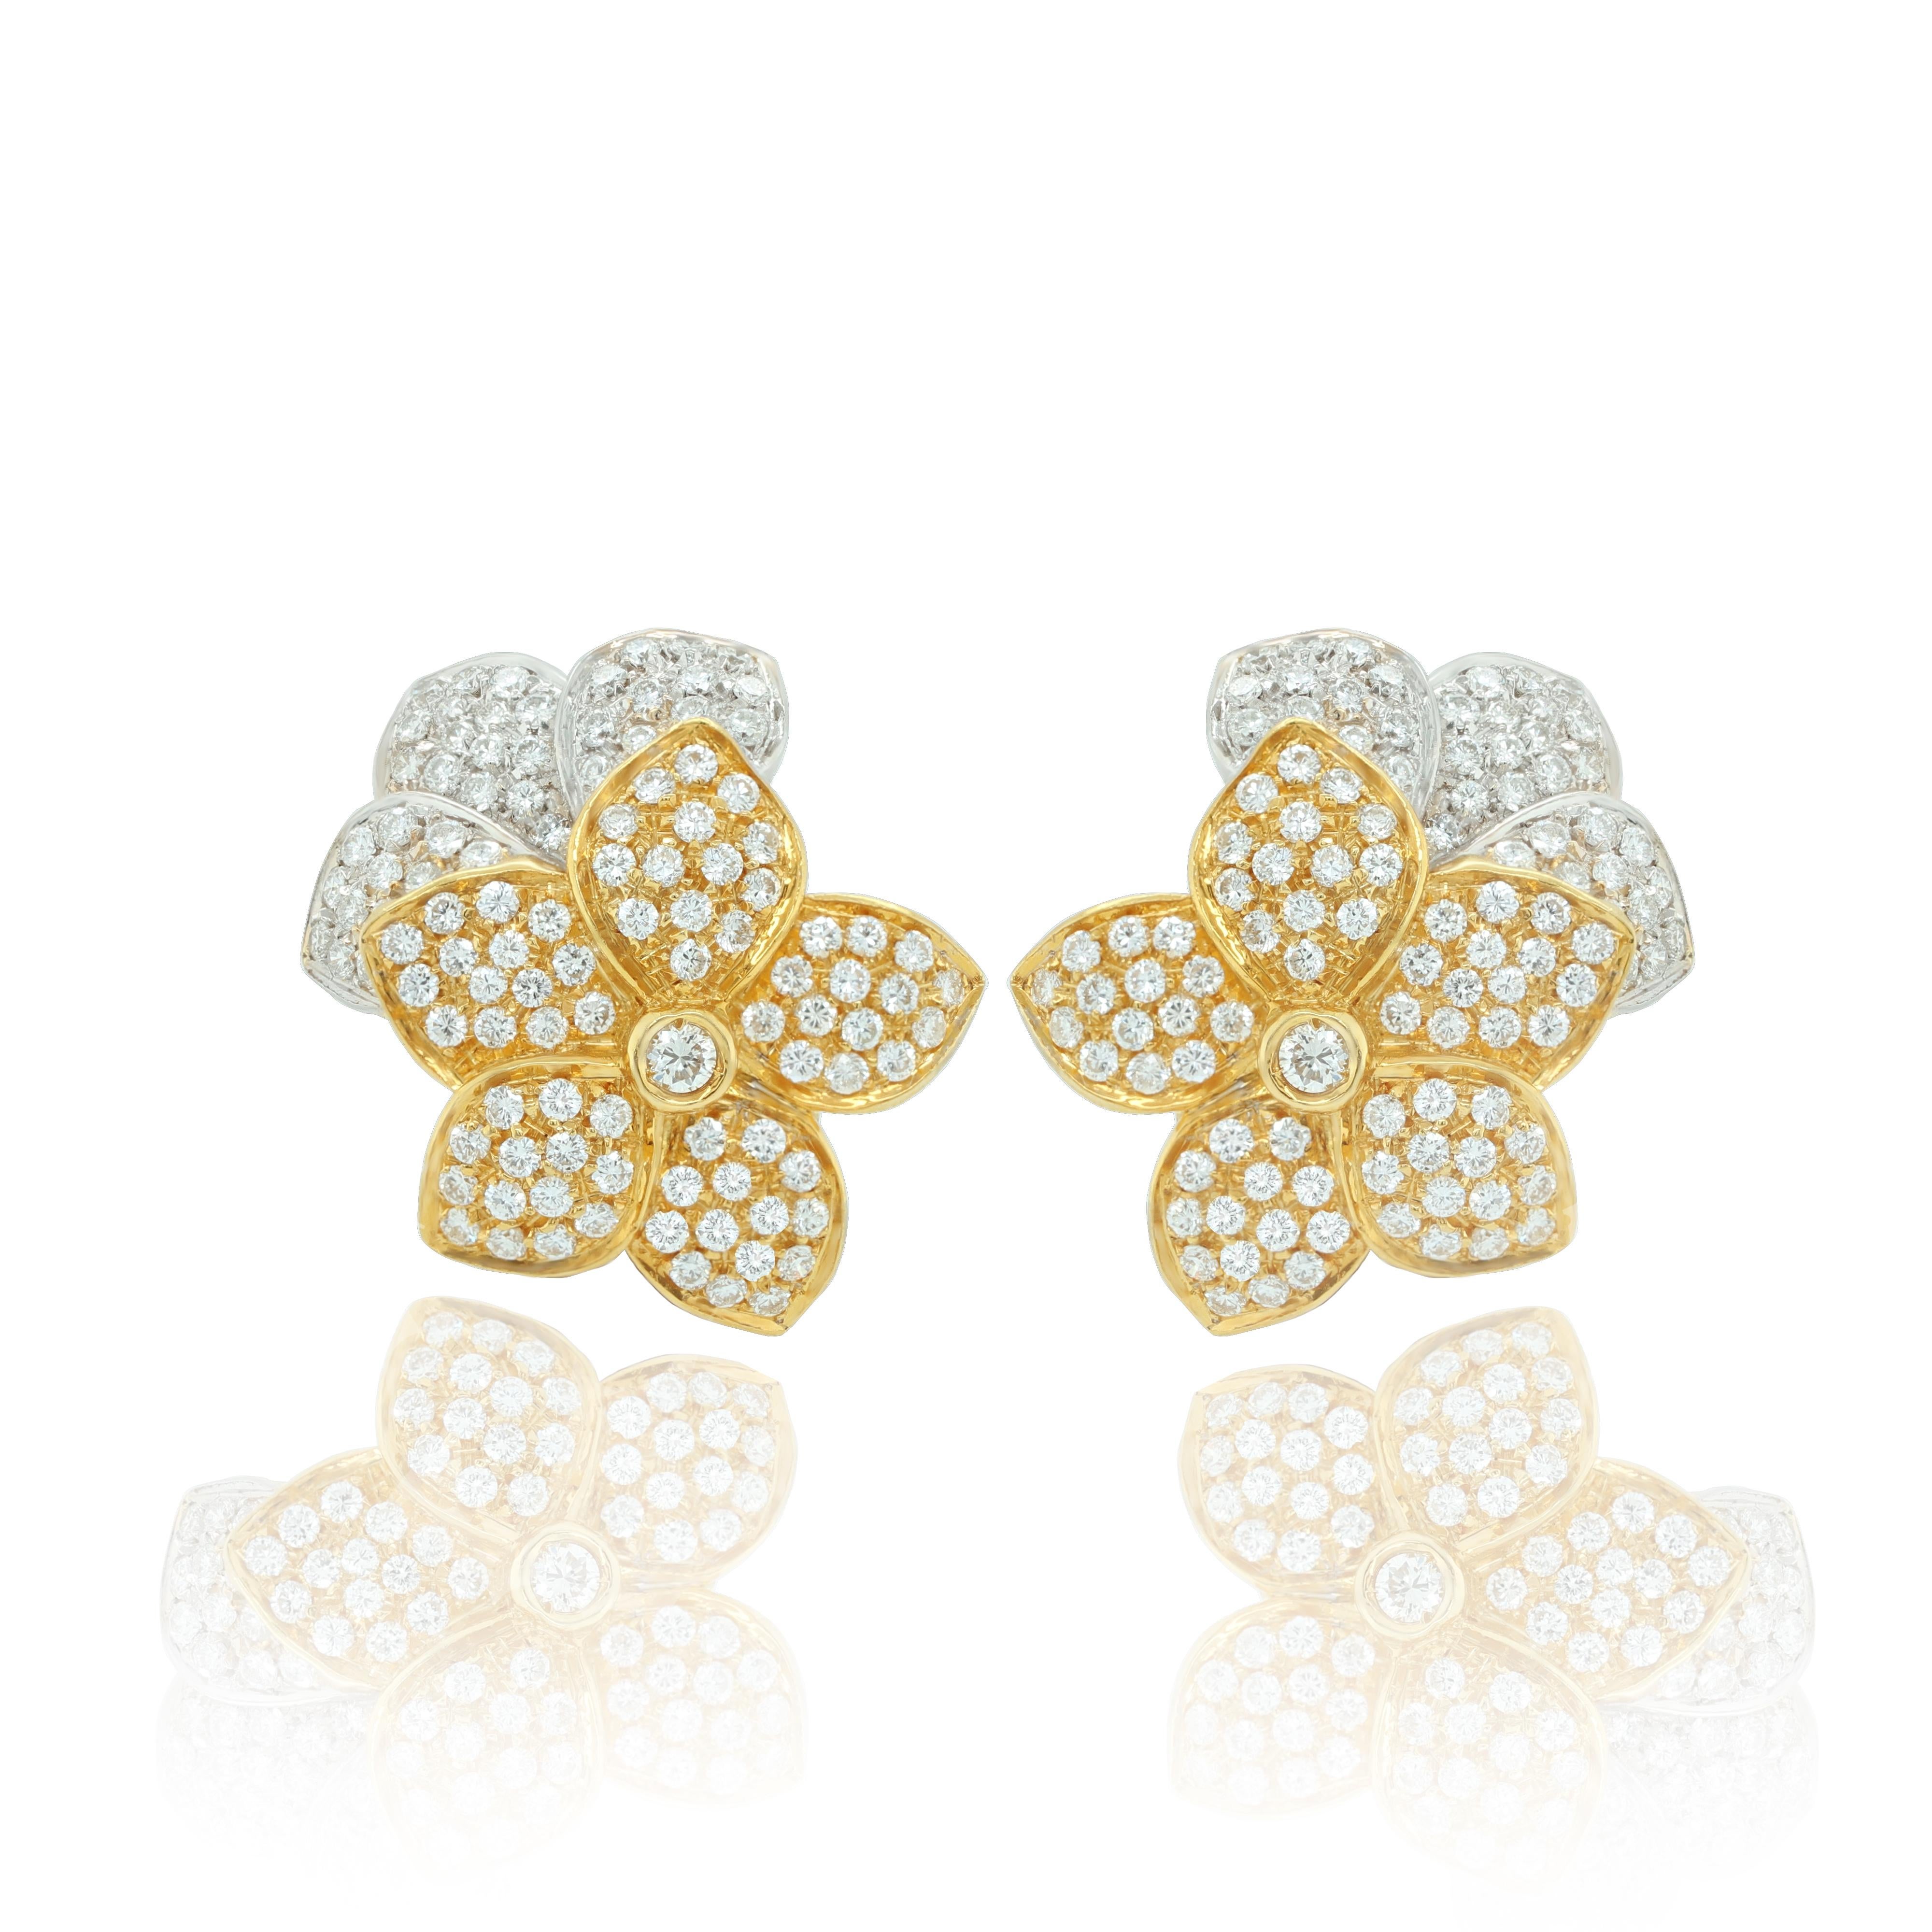 18kt yellow and white gold flower shaped diamond earrings feature 3.00cts.
